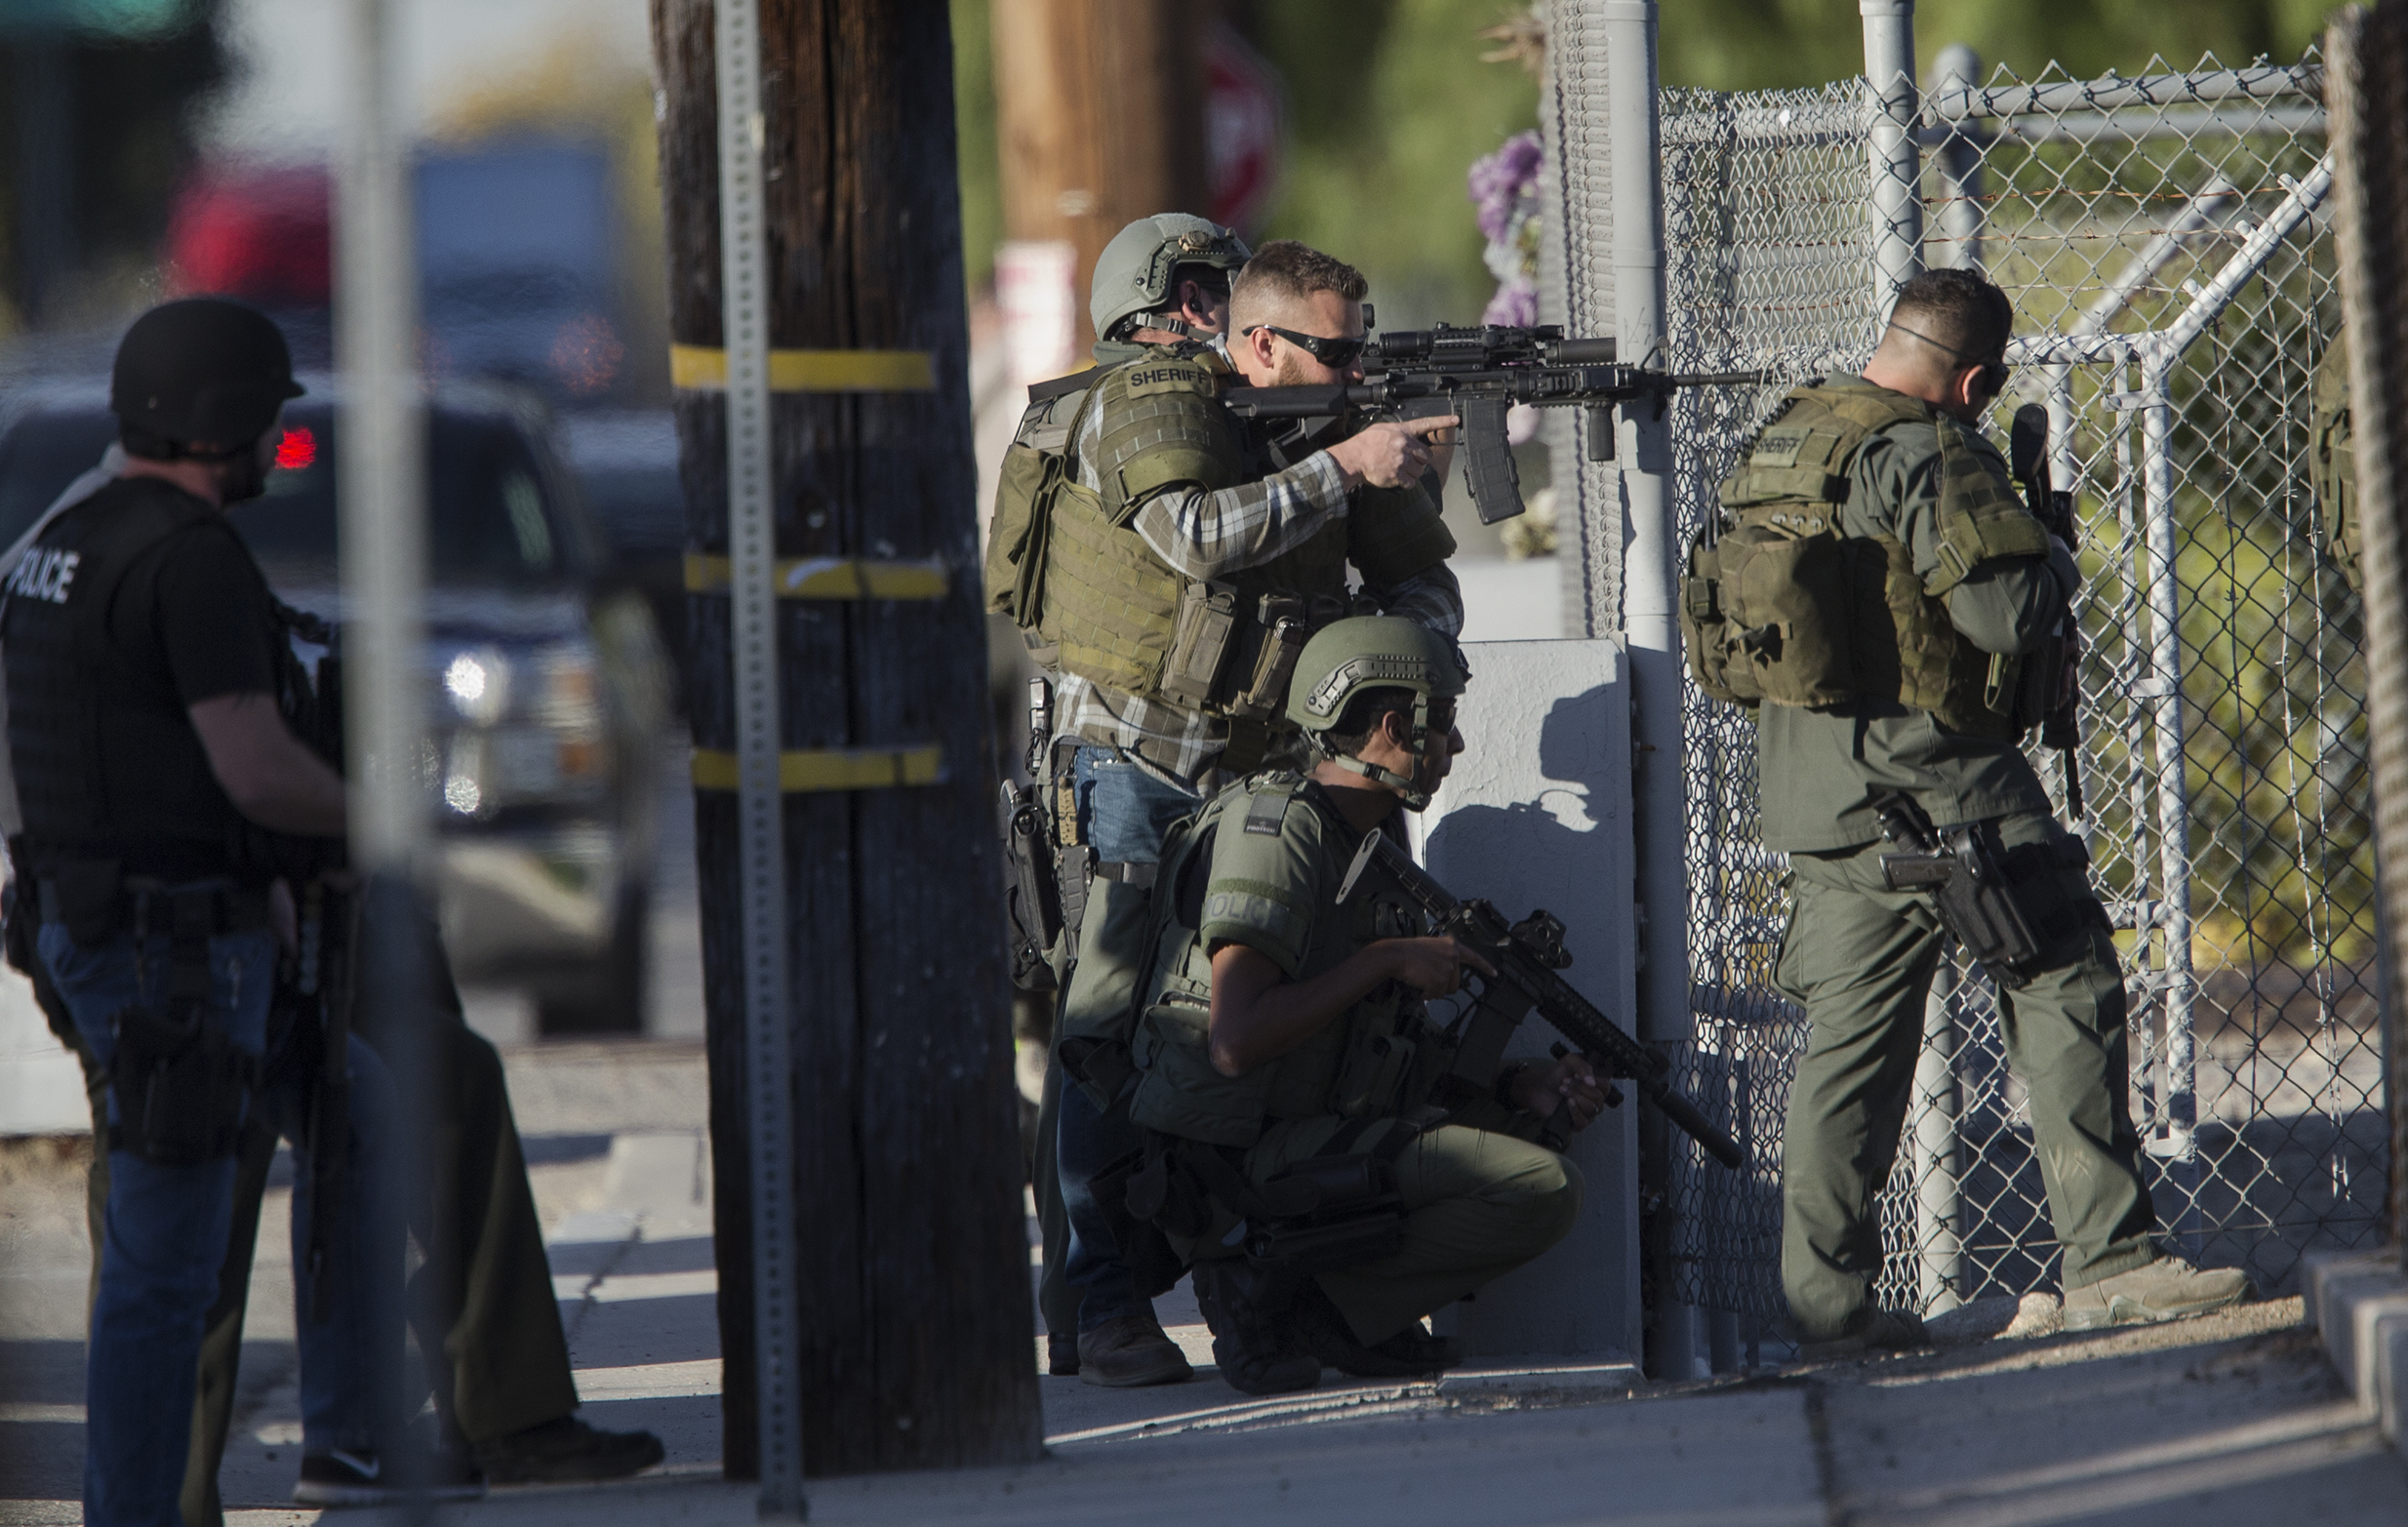 PHOTO: SWAT officers search near Victoria Elementary School on Richardson Street for the suspects involved in the mass shooting of 14 people at the Inland Regional Center on Dec. 2, 2015 in San Bernardino, Calif.